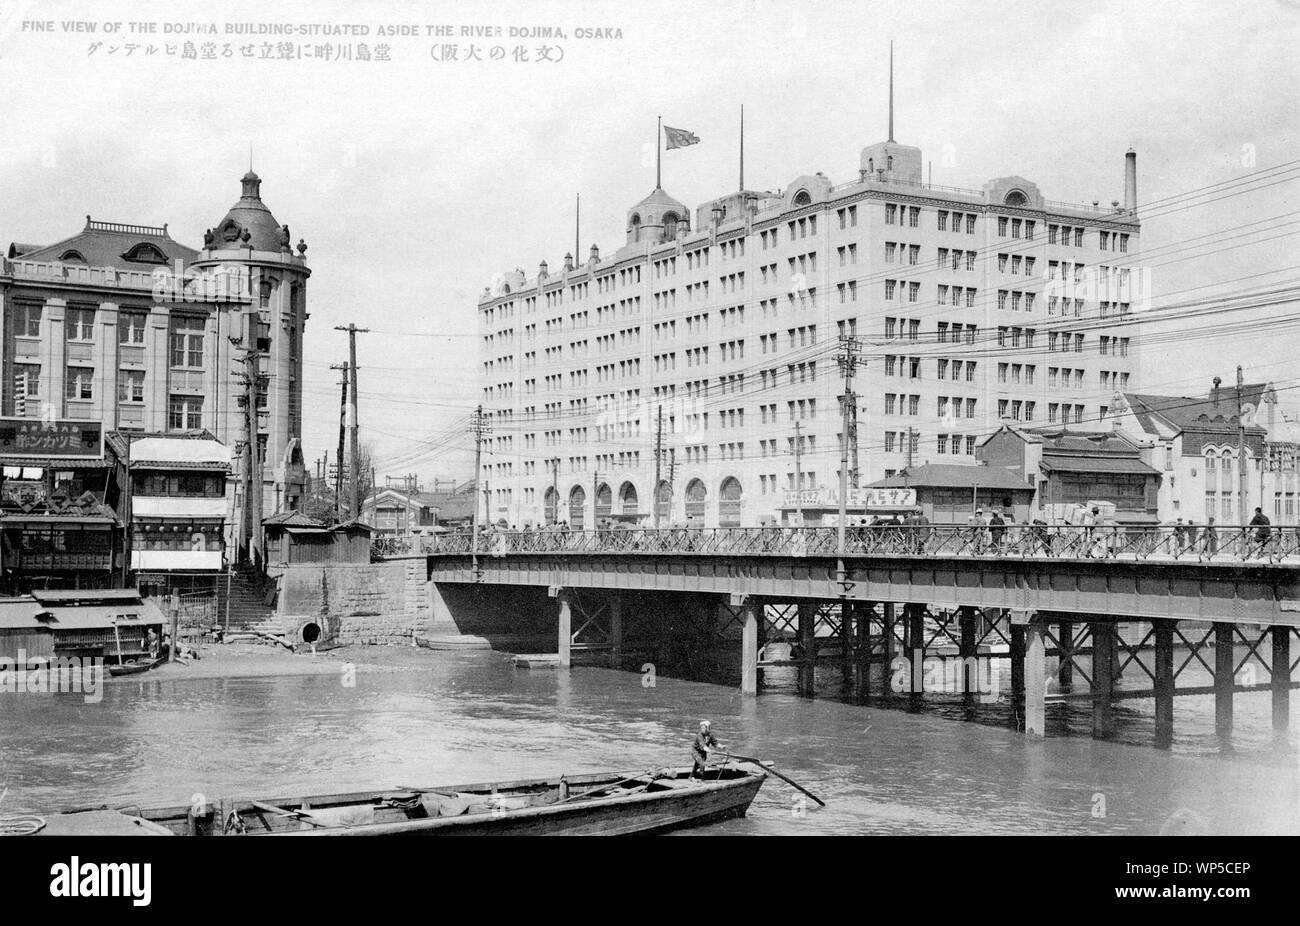 [ 1920s Japan - Oebashi Bridge in Osaka ] —   Oebashi Bridge over the Dojima River in Osaka.  The large building is the Dojima Building, constructed in 1923 (Taisho 12) by Takenaka Komuten. The building with the dome housed Fukutoku Seimen Hoken (福徳生命保険). It was designed by Kingo Tatsuno (辰野金吾, 1854-1919) and Yasushi Kataoka (片岡安, 1876-1946) and opened in 1919 (Taisho 8).  The steel bridge on this photo was built in 1910 (Meiji 43). Construction of the current stone bridge was started in 1930 (Showa 5).  This effectively dates this photo to the 1920s.  20th century vintage postcard. Stock Photo